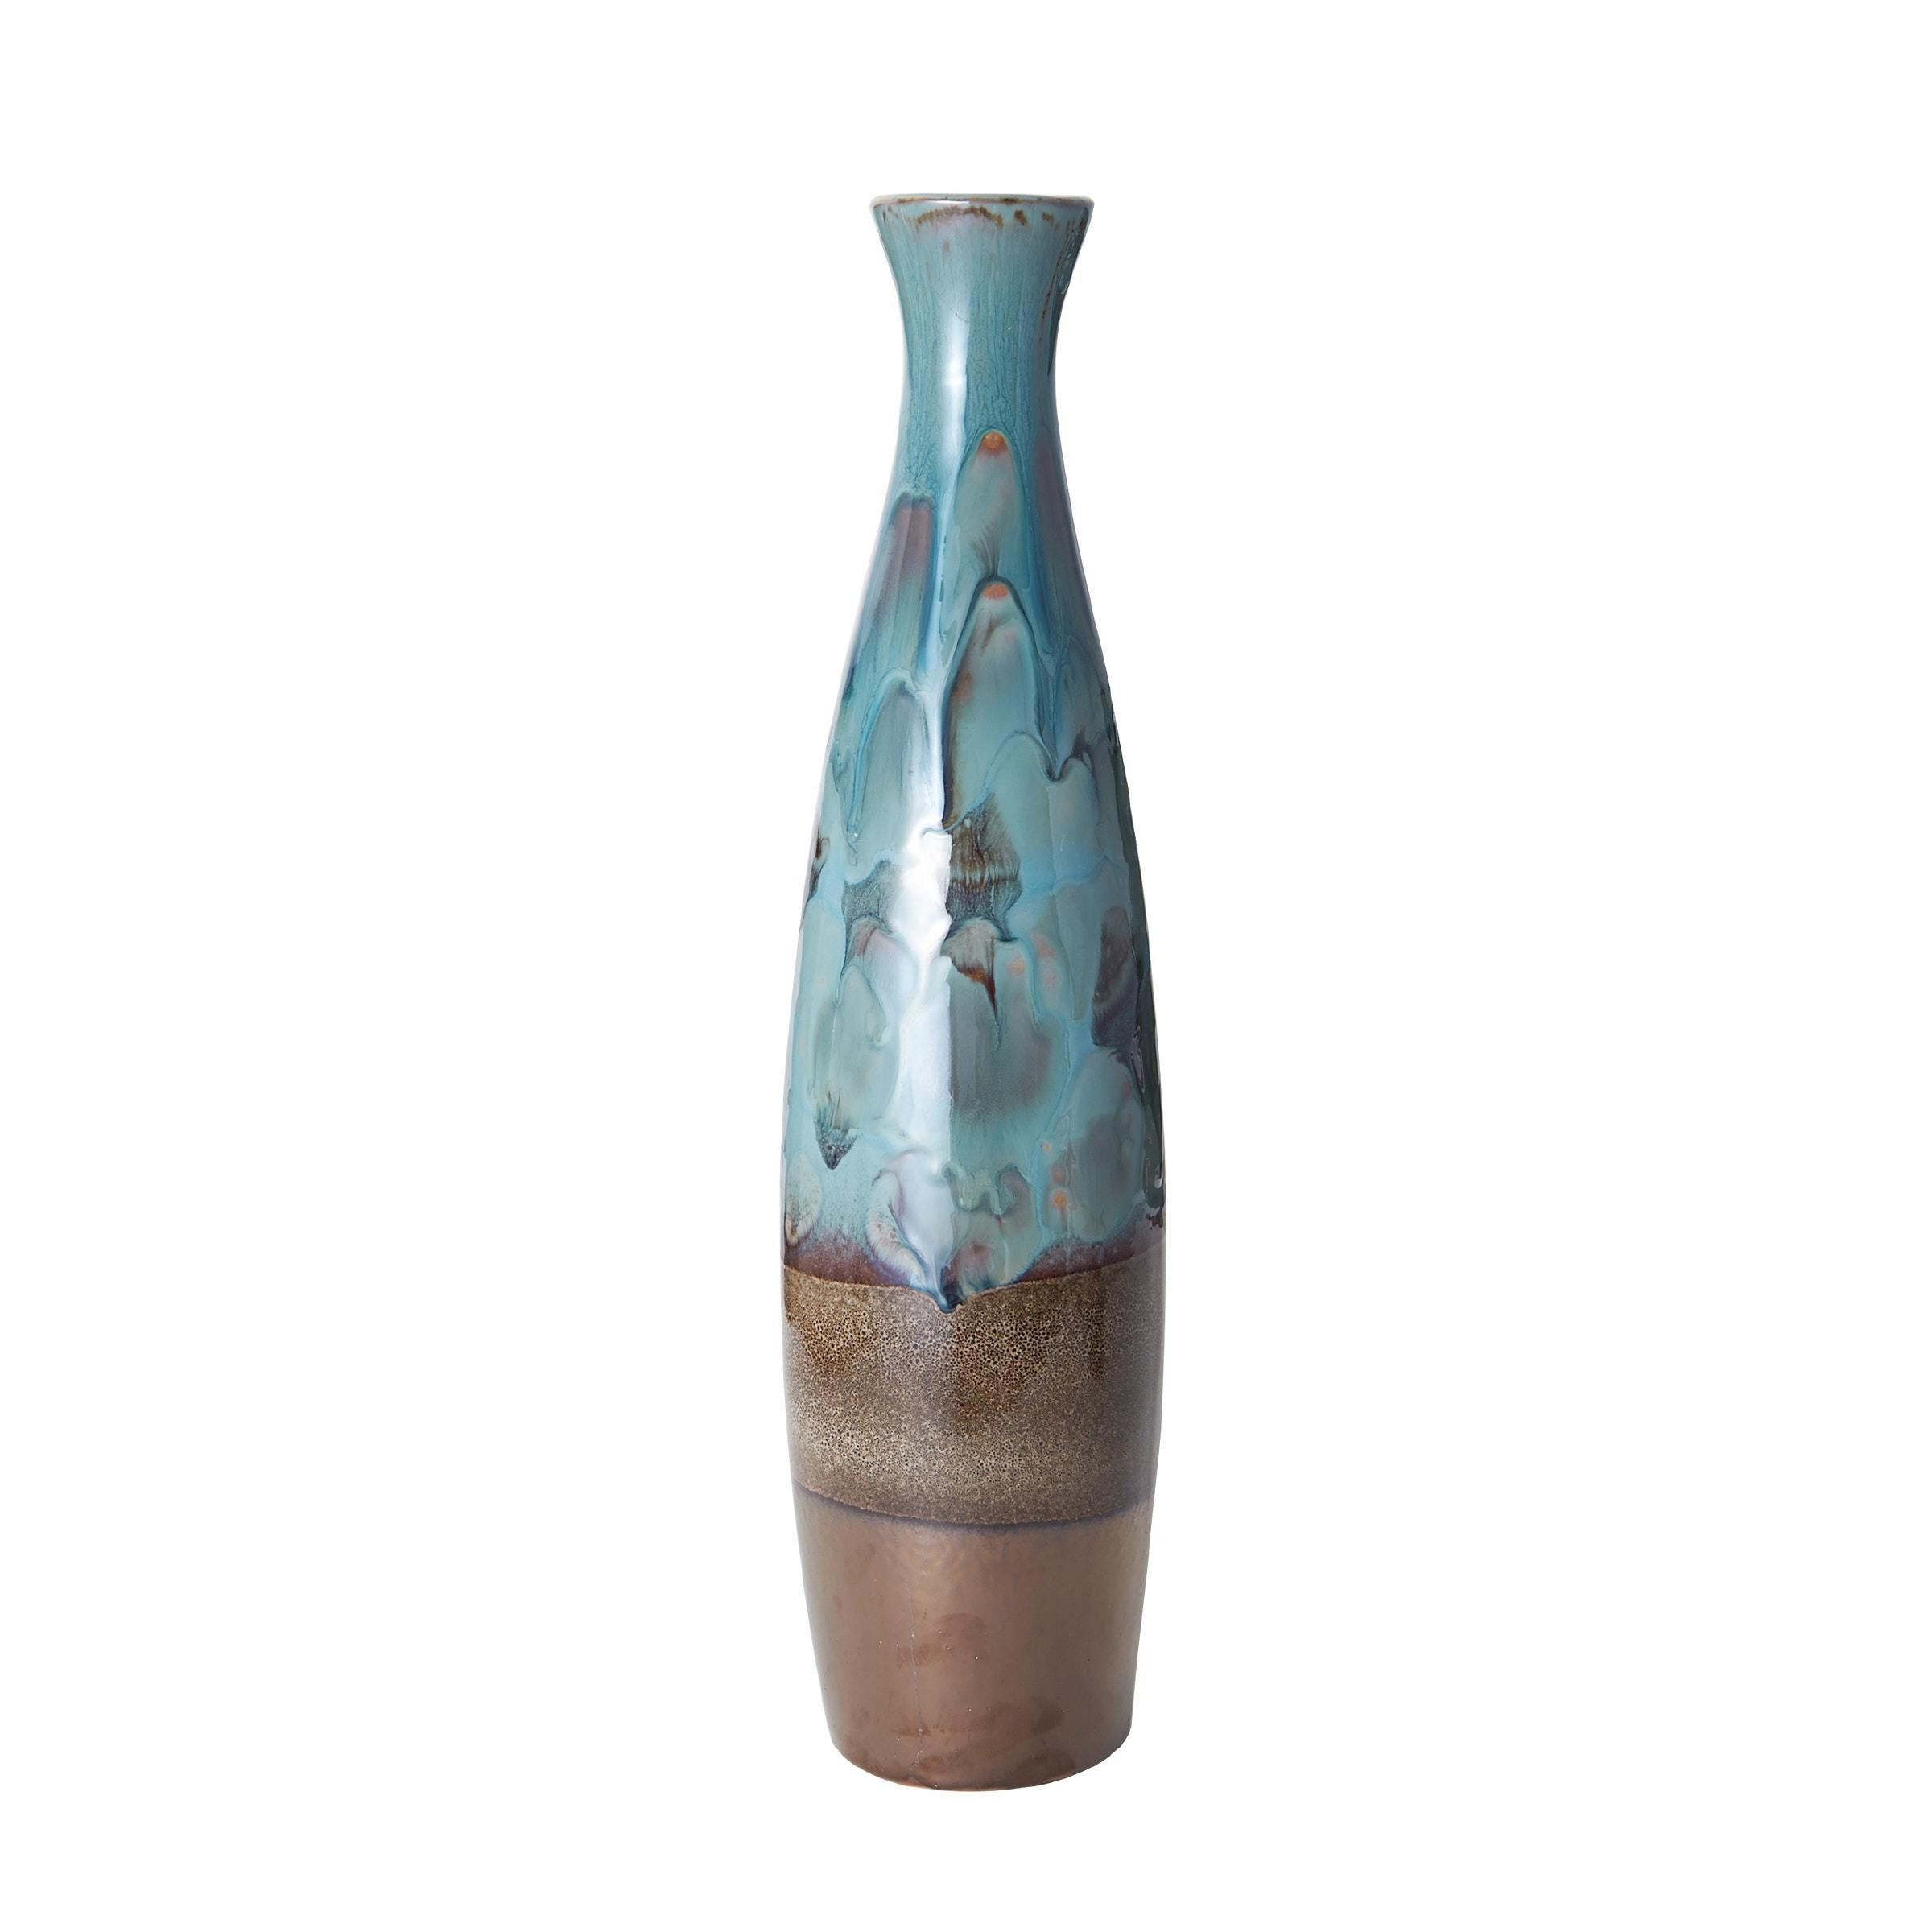 25 Nice Mikasa Florale Vase 2024 free download mikasa florale vase of shop mikasa 5x20in mottled blue ceramic vase free shipping on throughout shop mikasa 5x20in mottled blue ceramic vase free shipping on orders over 45 overstock com 181